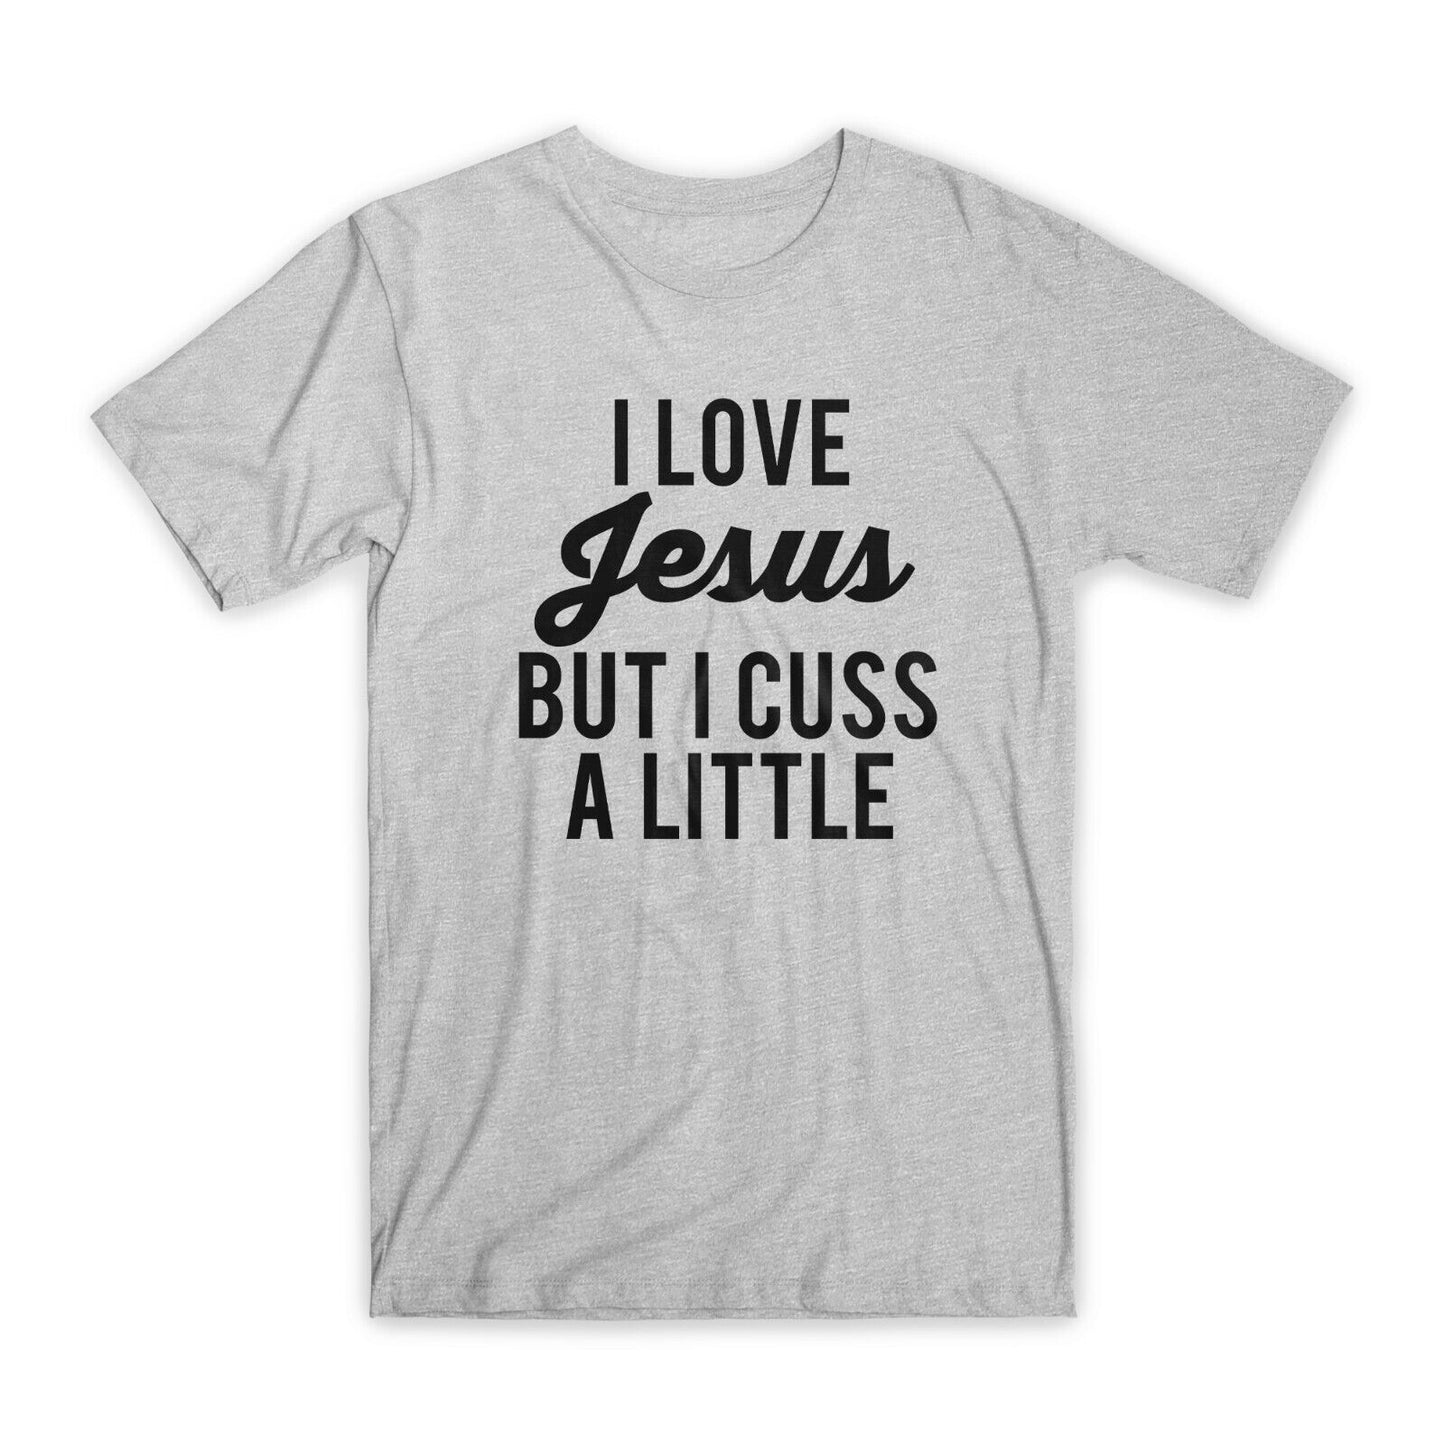 I Love Jesus But I Cuss A Little T-Shirt Premium Soft Cotton Funny Tees Gift NEW